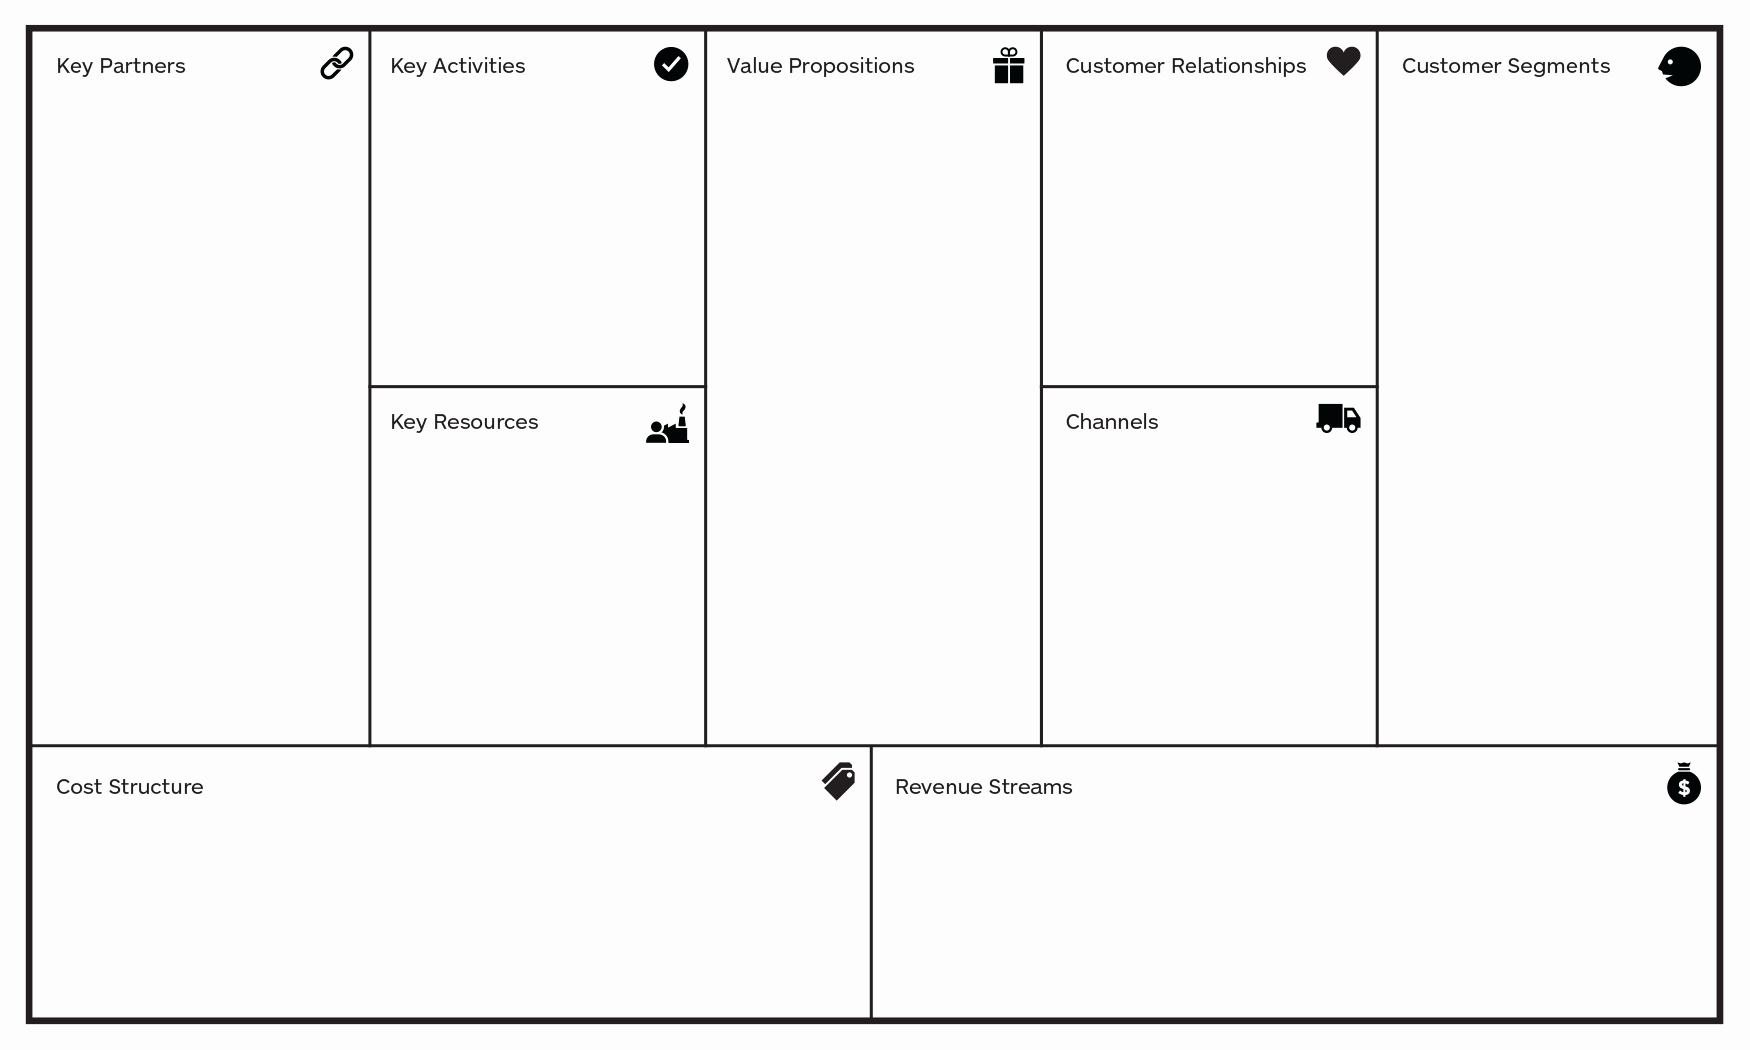 Business Model Template Word Elegant Business Model Canvas Template